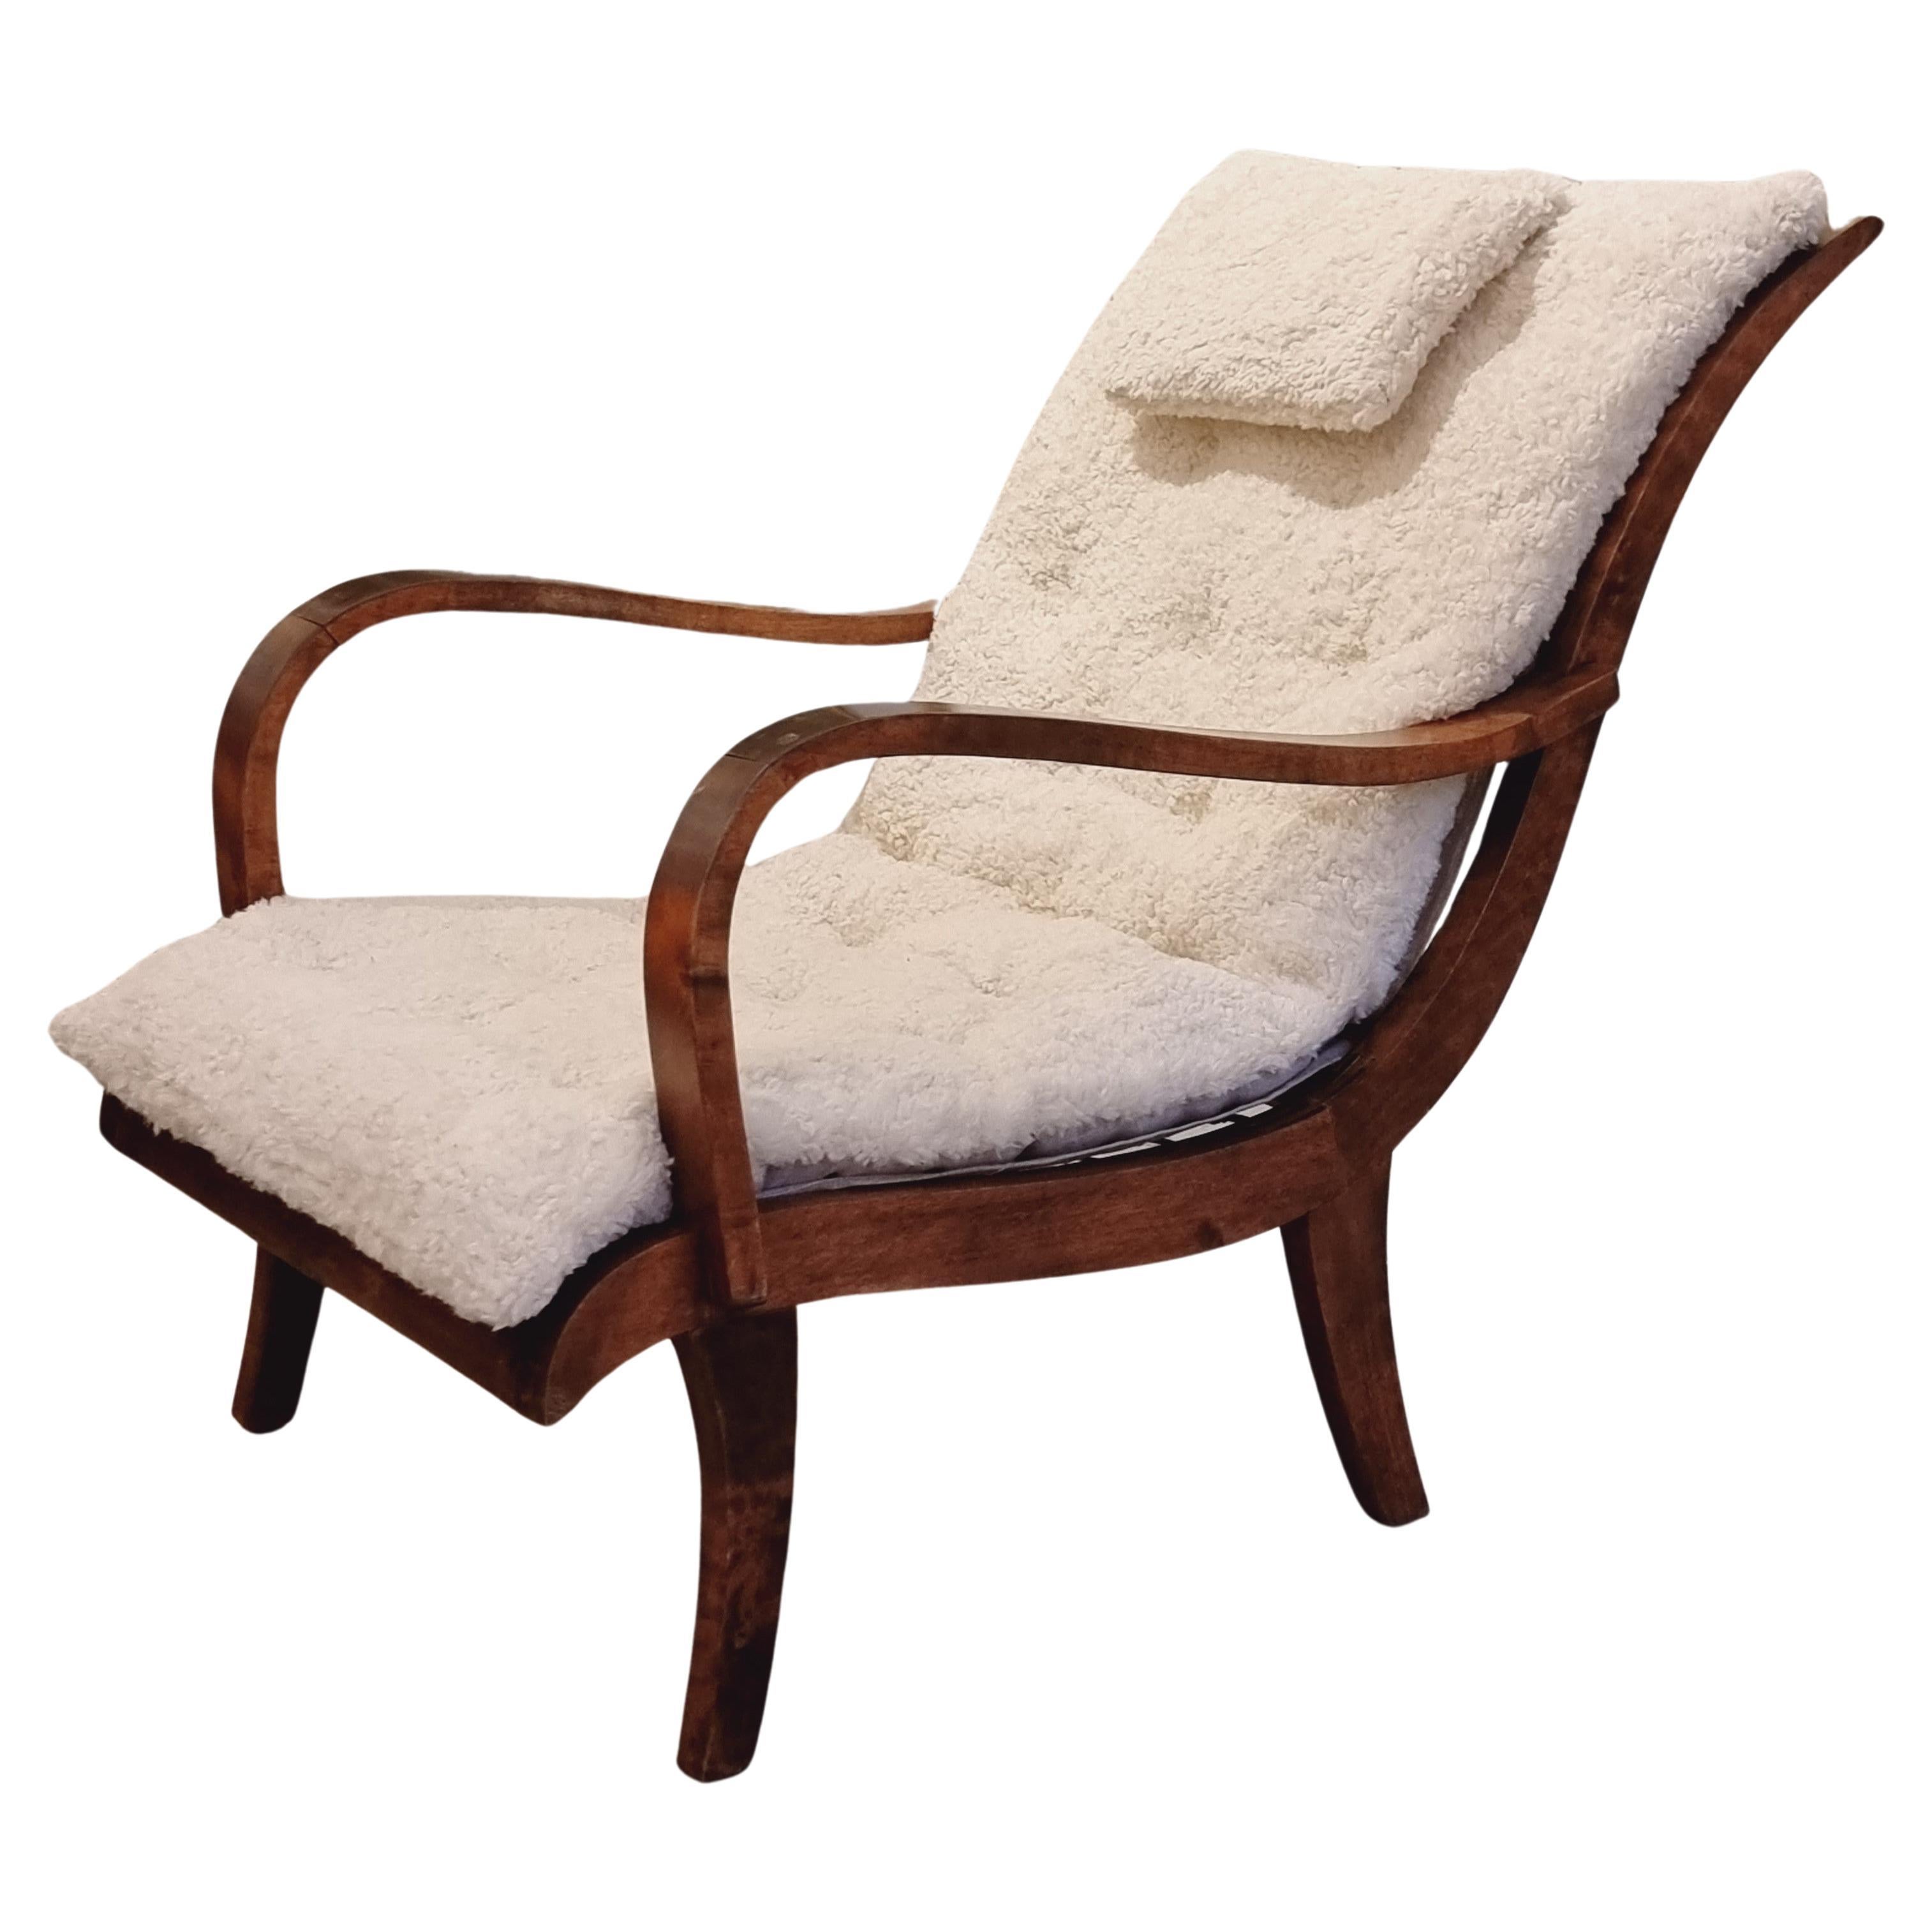 Wilhelm Knoll, easy chair, reupholstered, 1930s / Art Deco